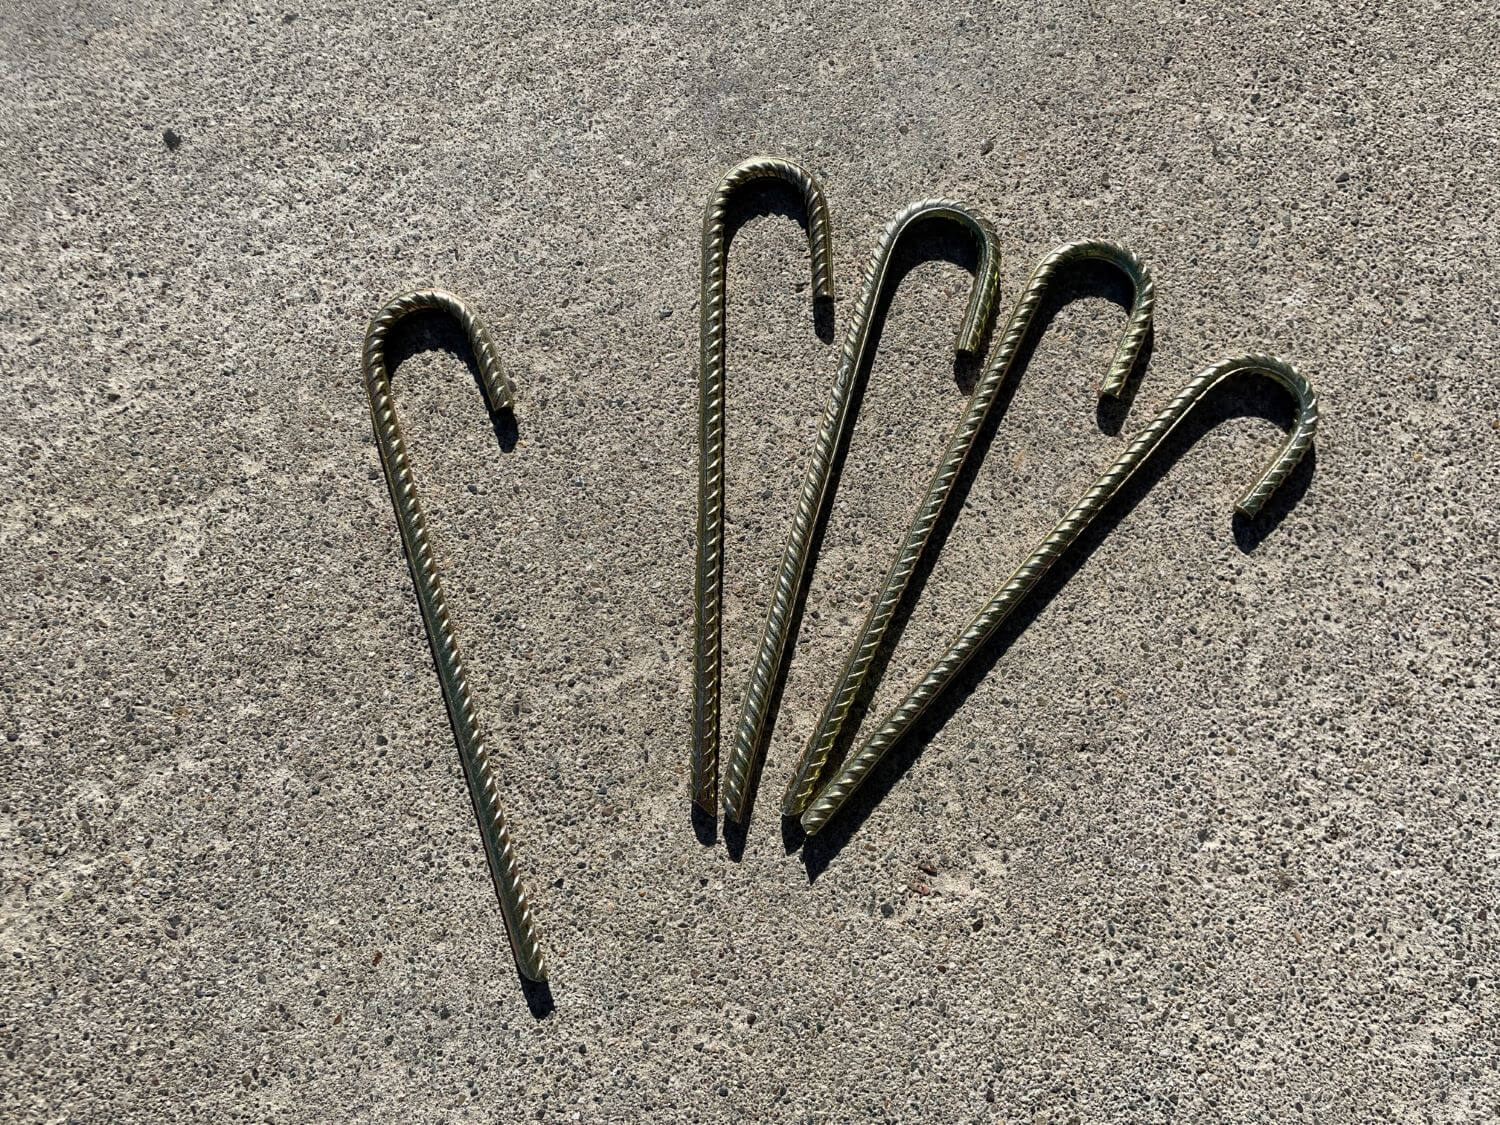 USA Made - #3 Rebar Stakes J Hook Heavy Duty Steel Ground Anchors